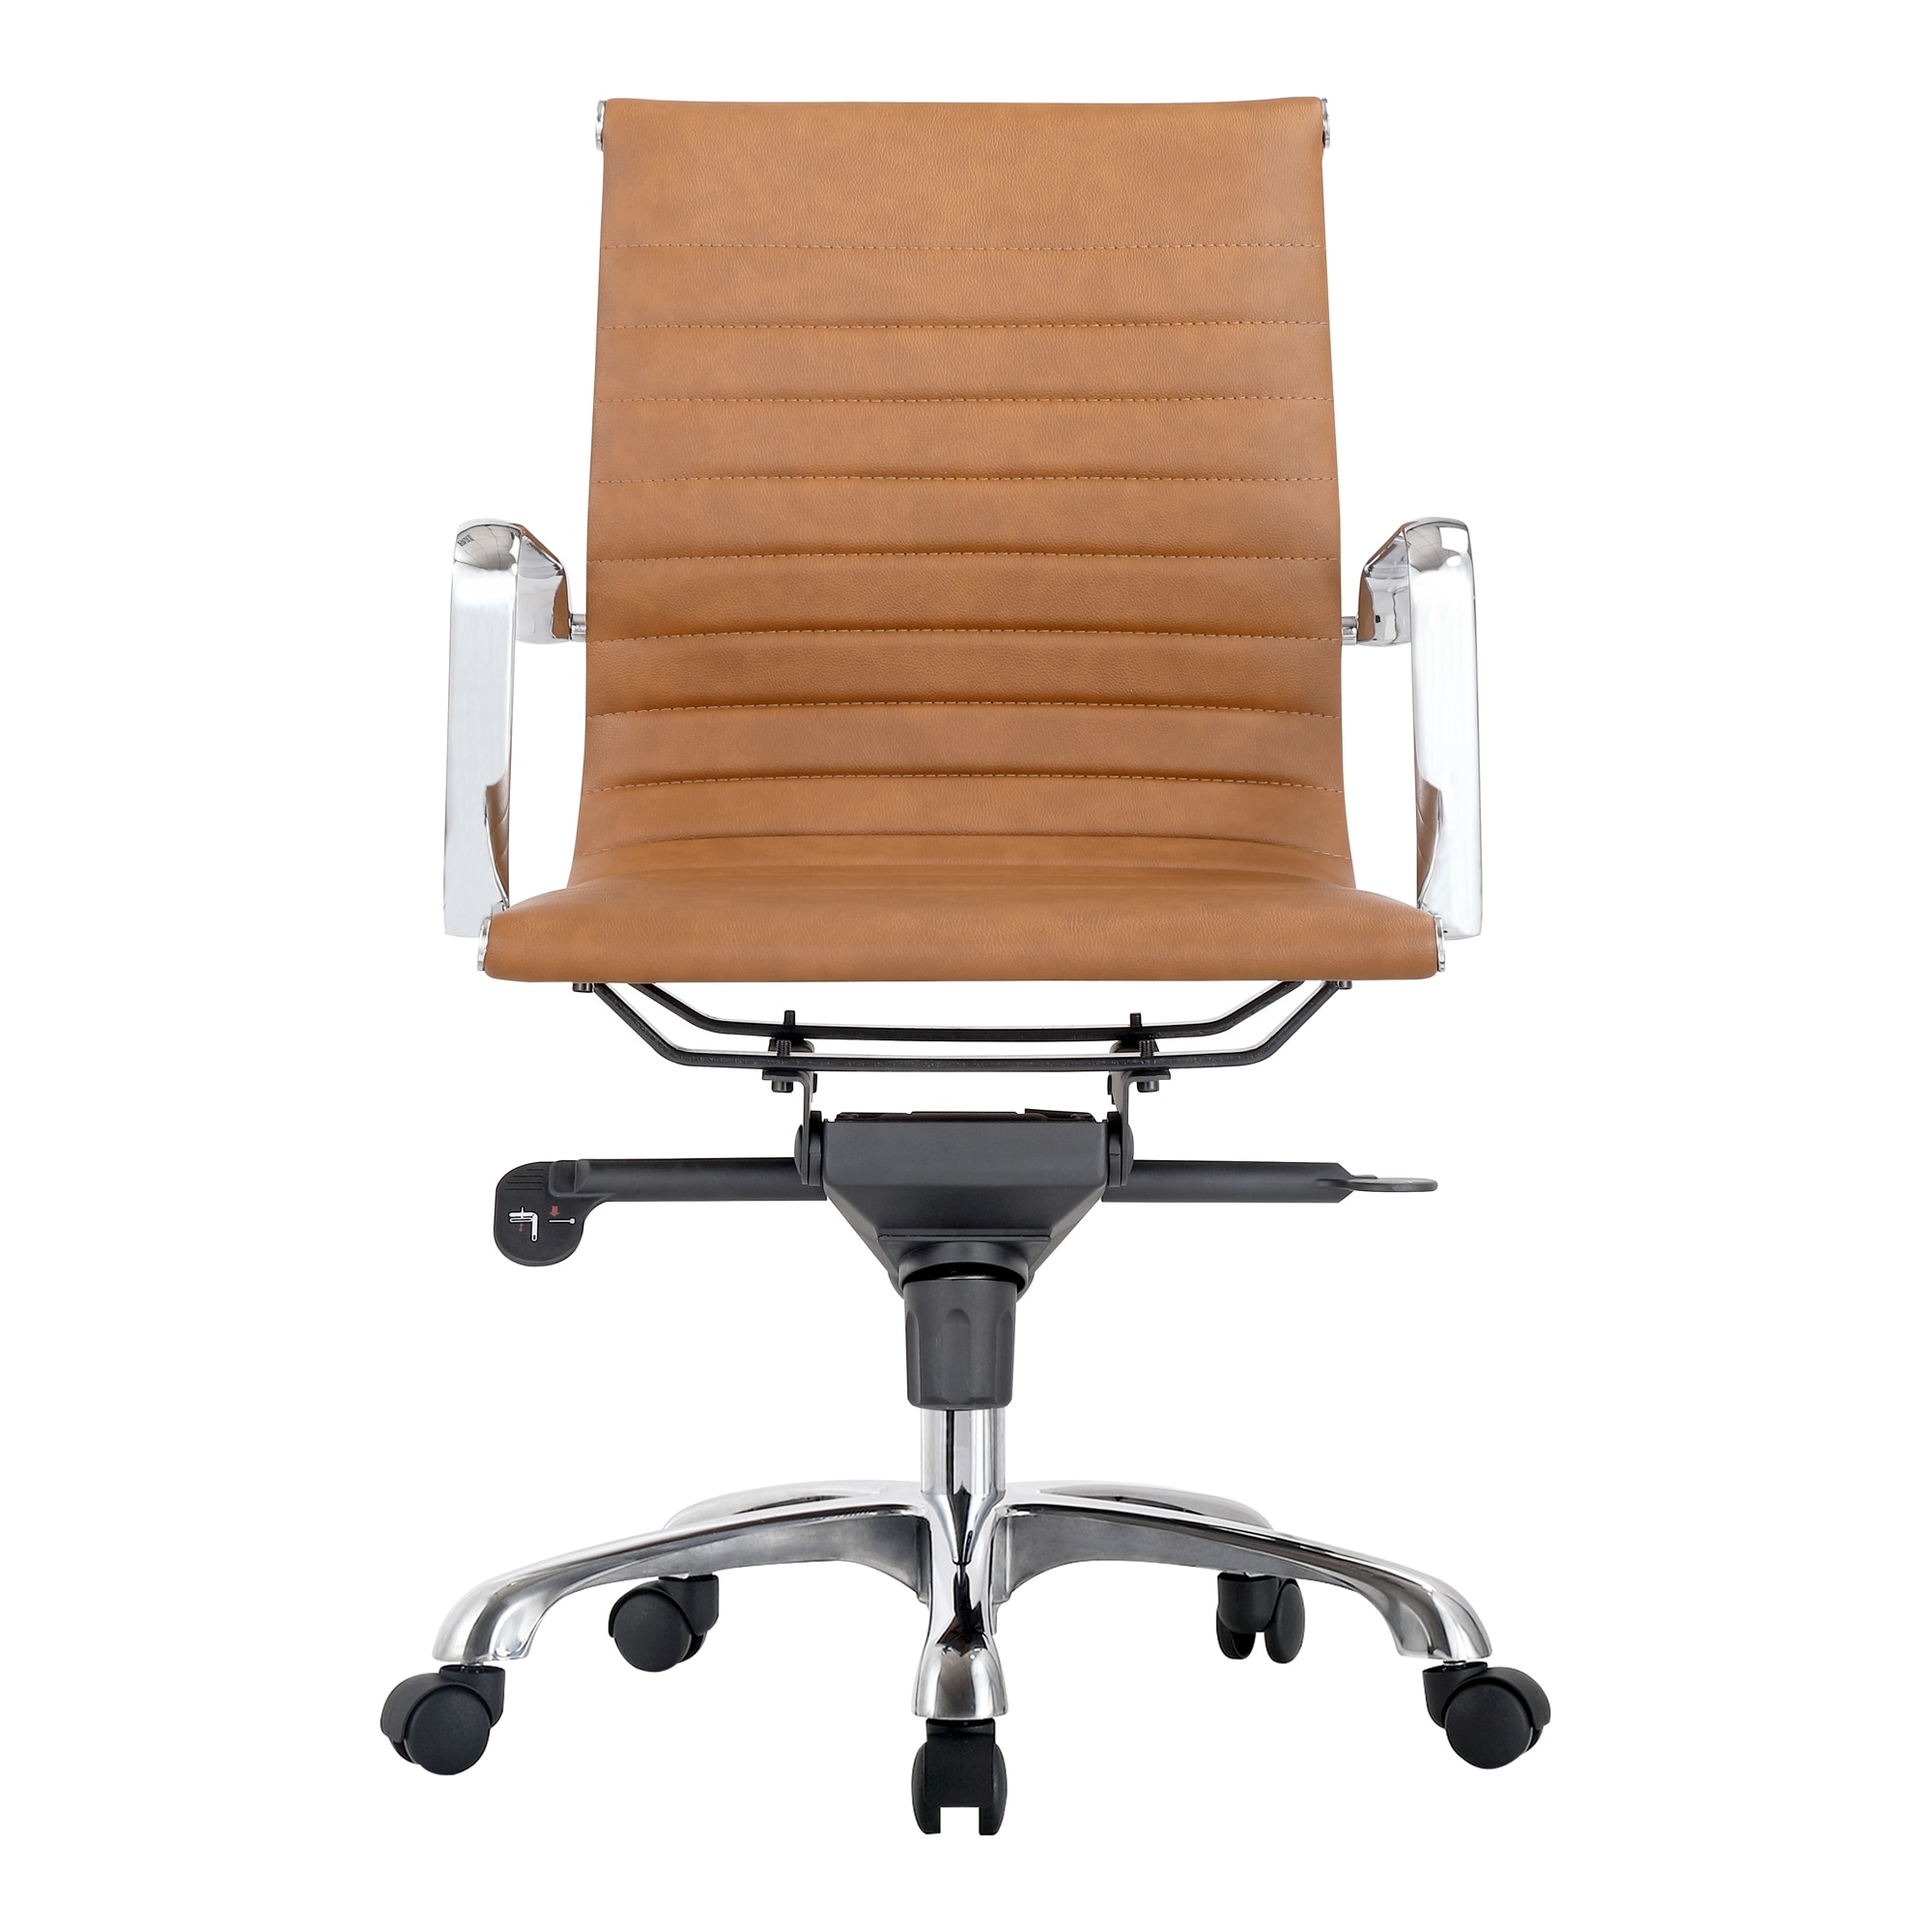 https://ak1.ostkcdn.com/images/products/is/images/direct/9b8a06eccdada9894aa4960589b2dbb5f109cf22/Aurelle-Home-Modern-Ribbed-Leather-Low-Back-Office-Swivel-Chair.jpg